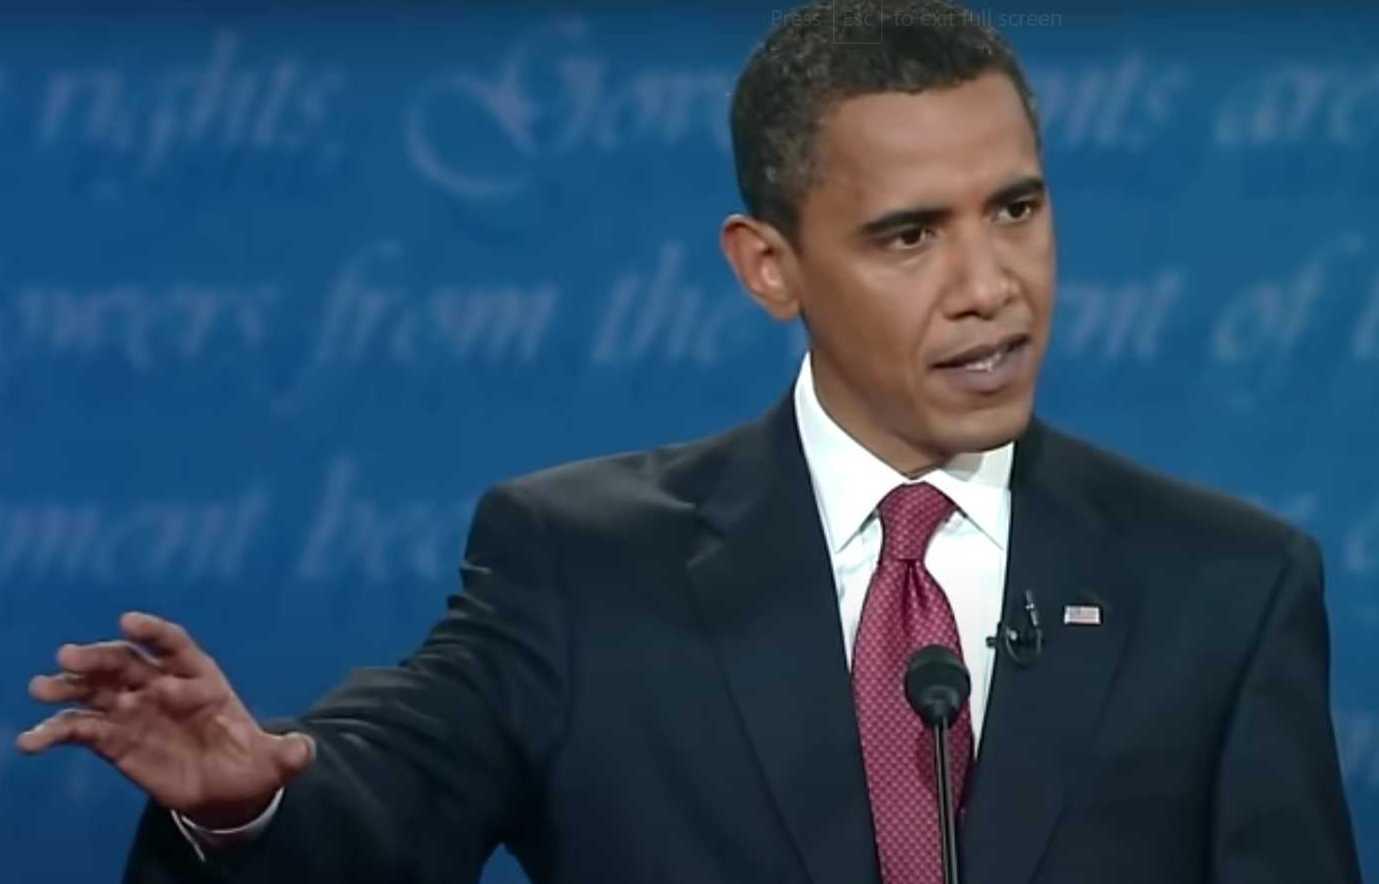 Barack Obama’s open palm gesture during his presidential debate with McCane 